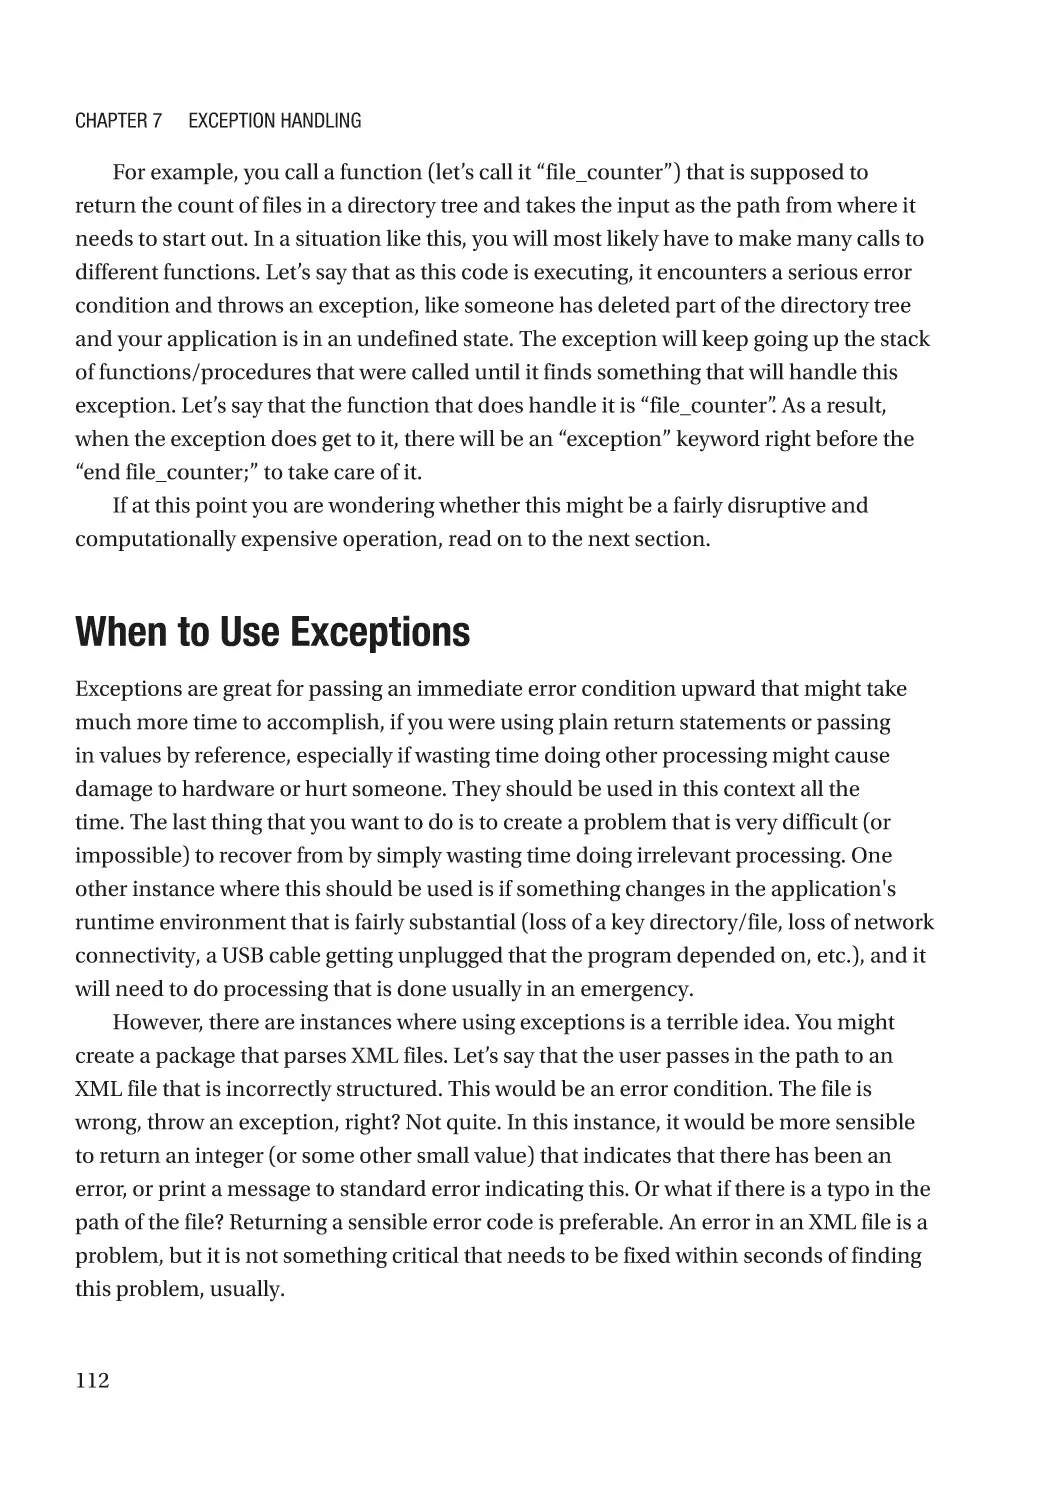 When to Use Exceptions